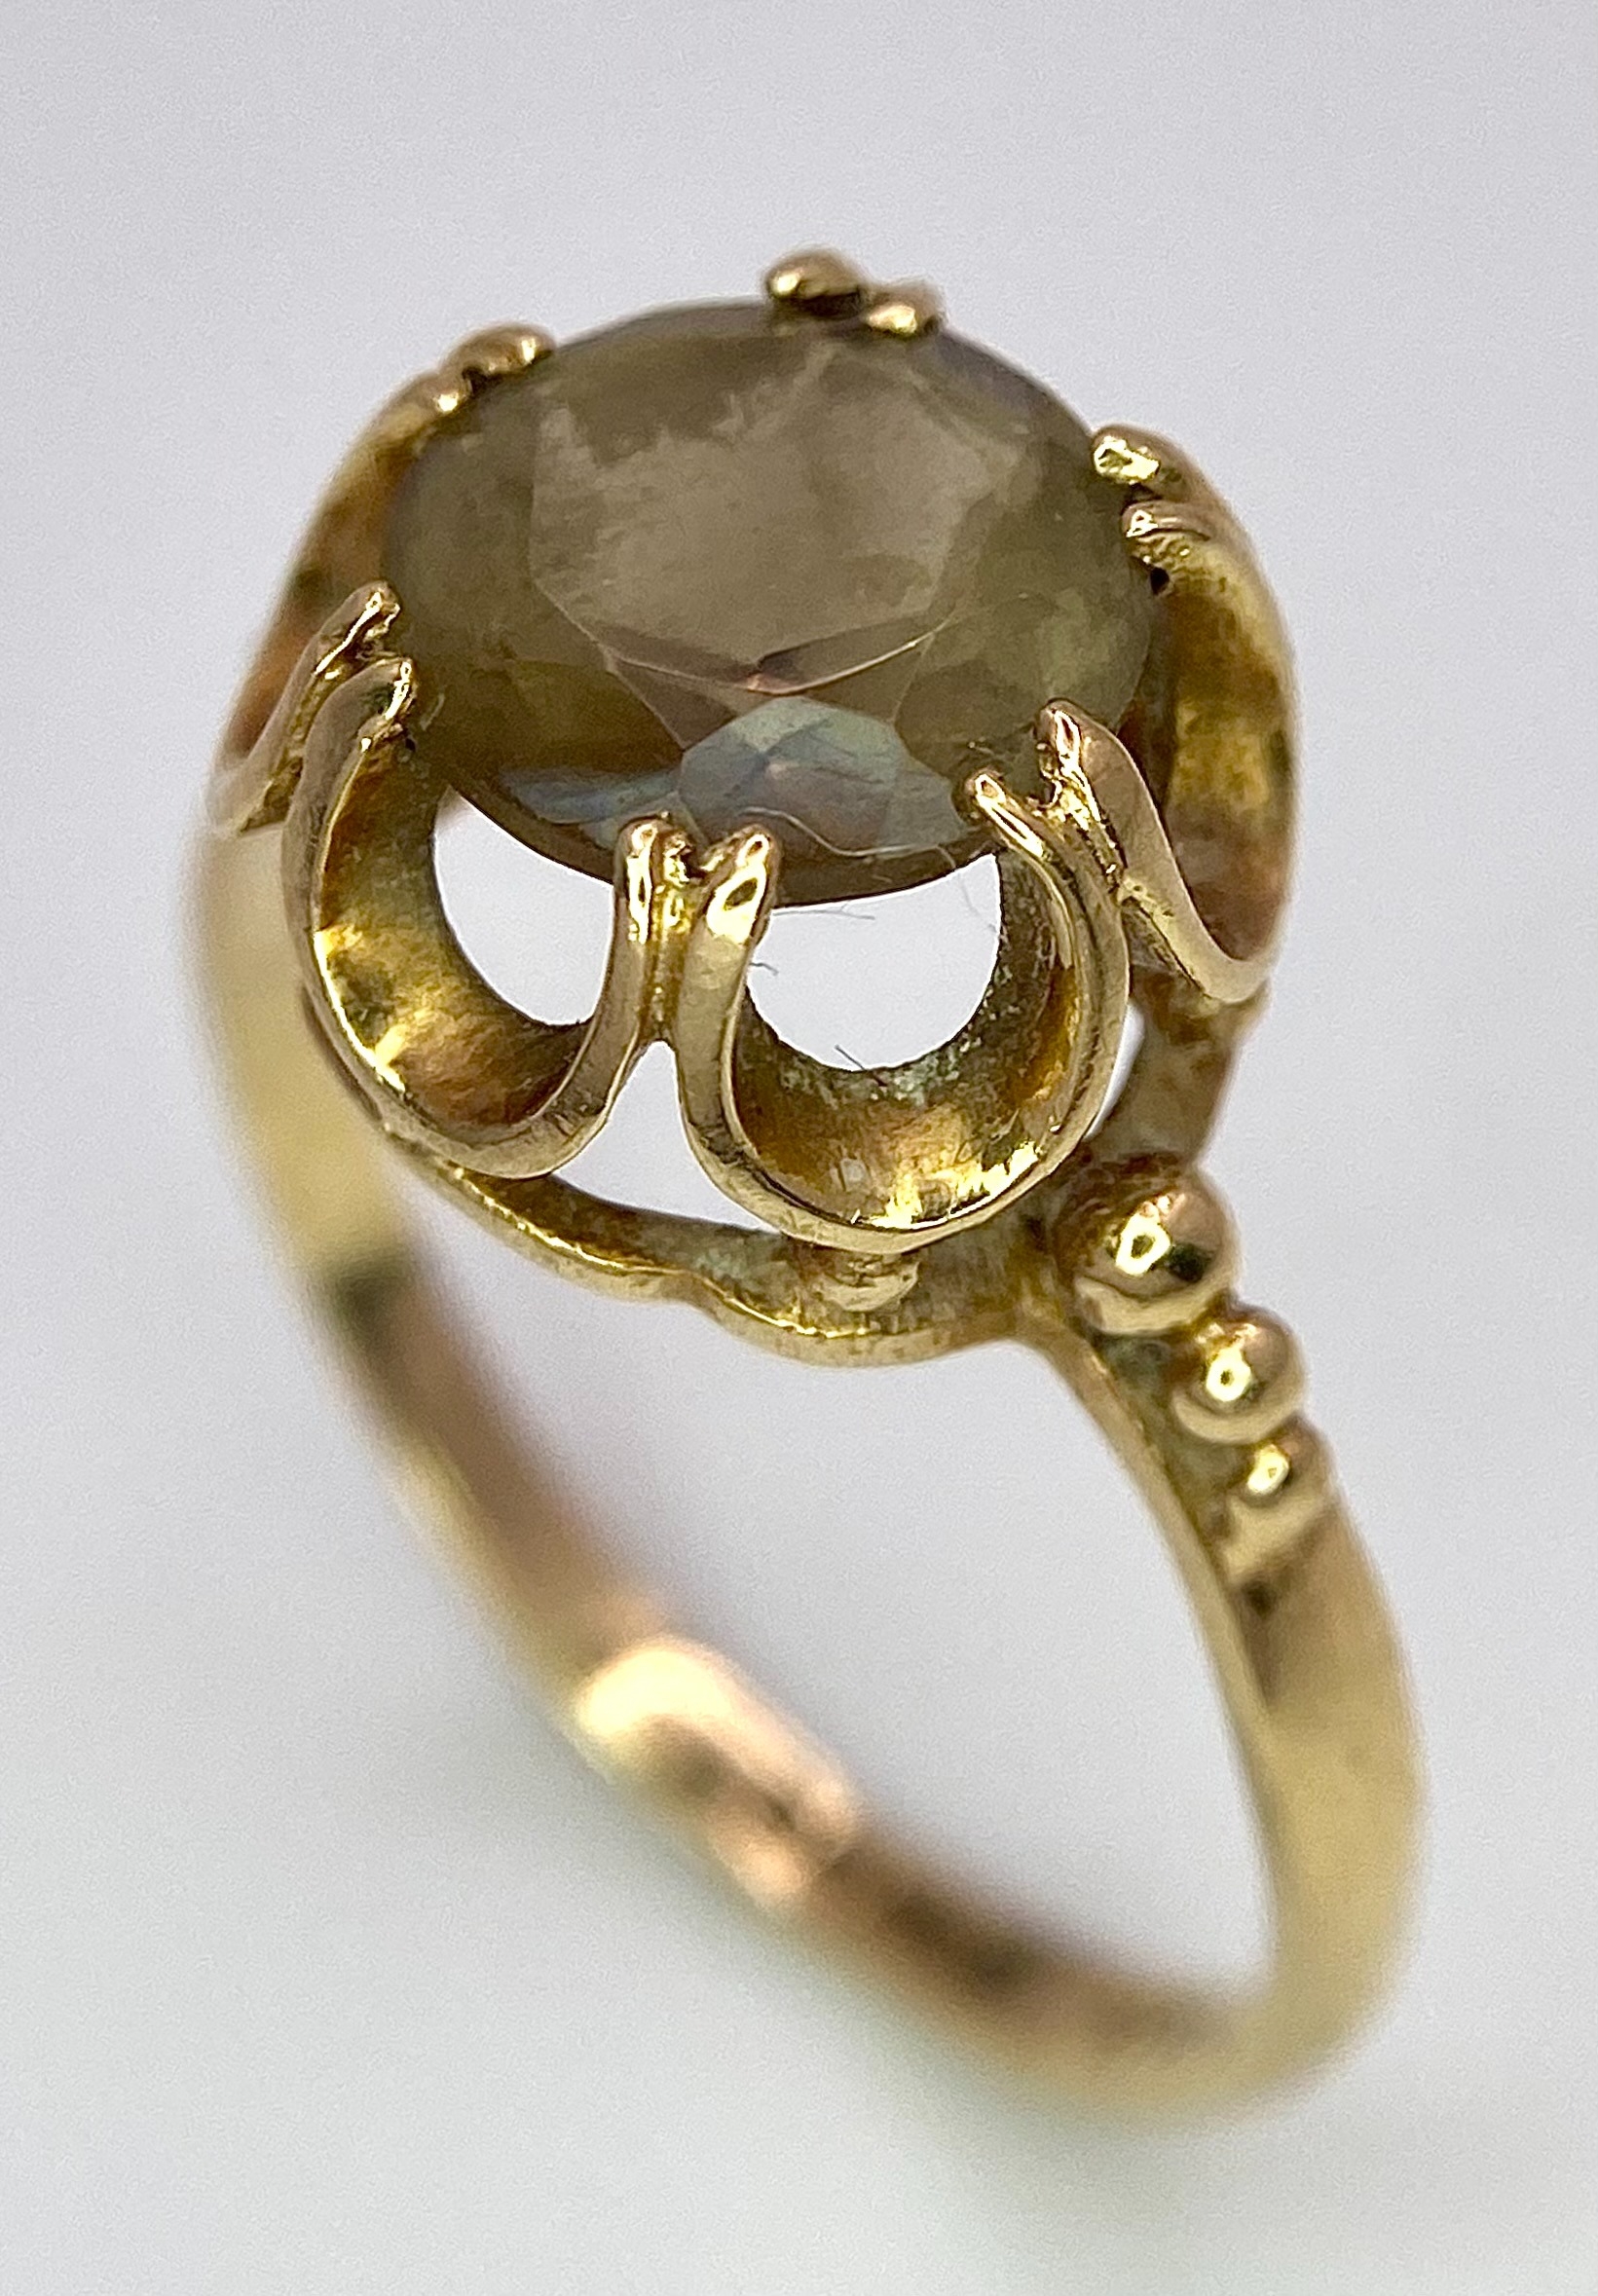 A 9K Yellow Gold Smoky Quartz Ring. Size P. 2.2g total weight. - Image 3 of 6